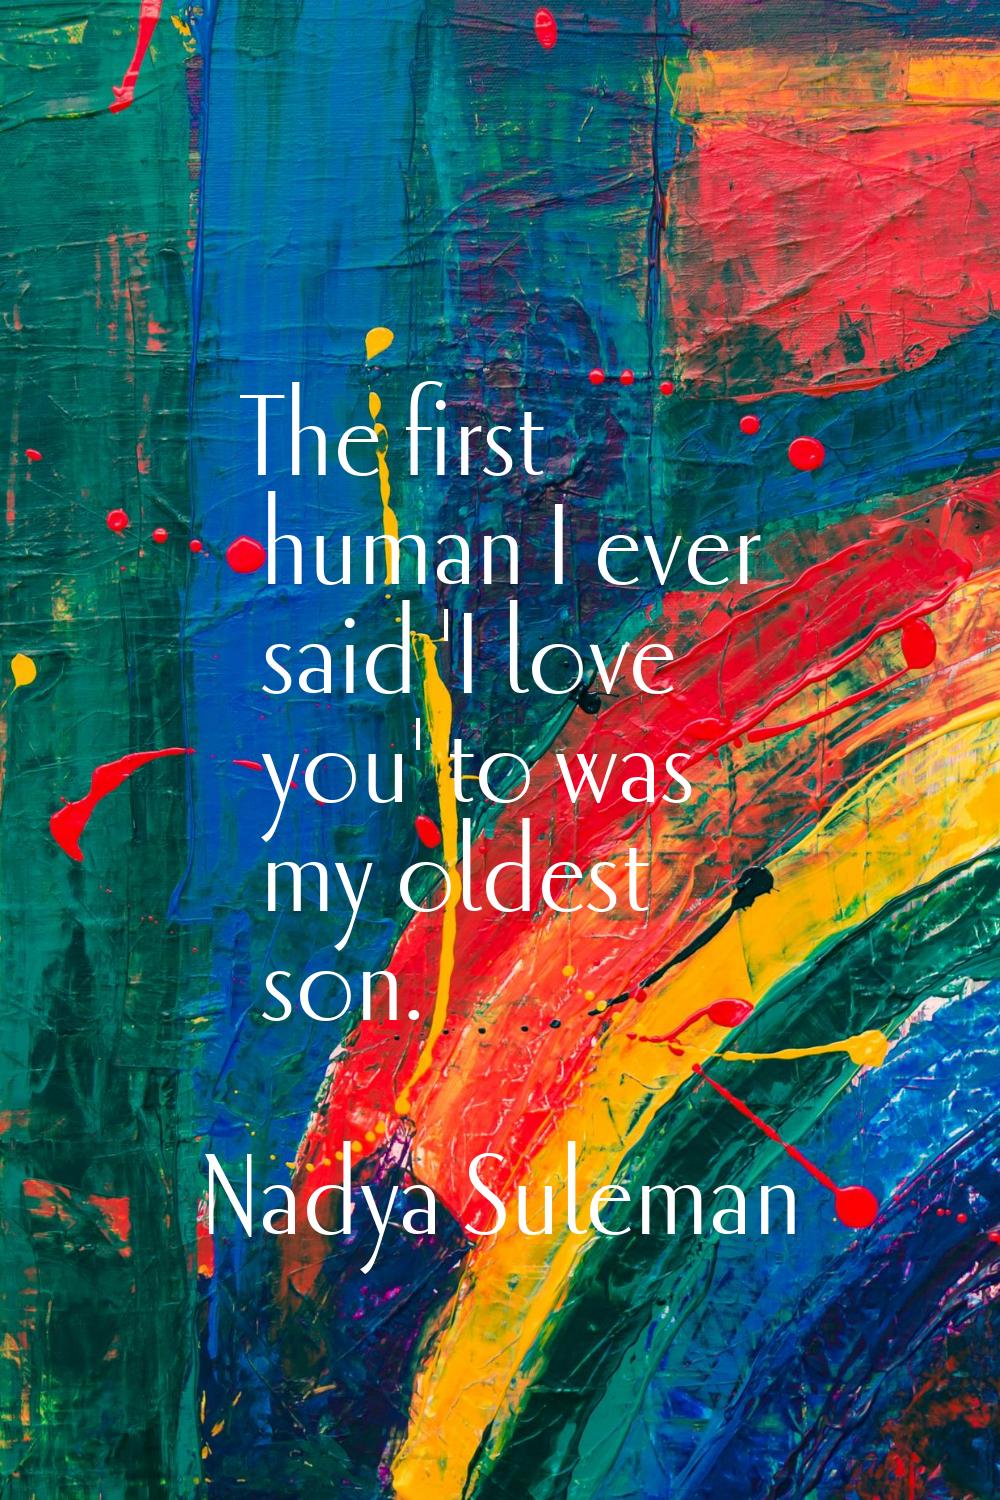 The first human I ever said 'I love you' to was my oldest son.